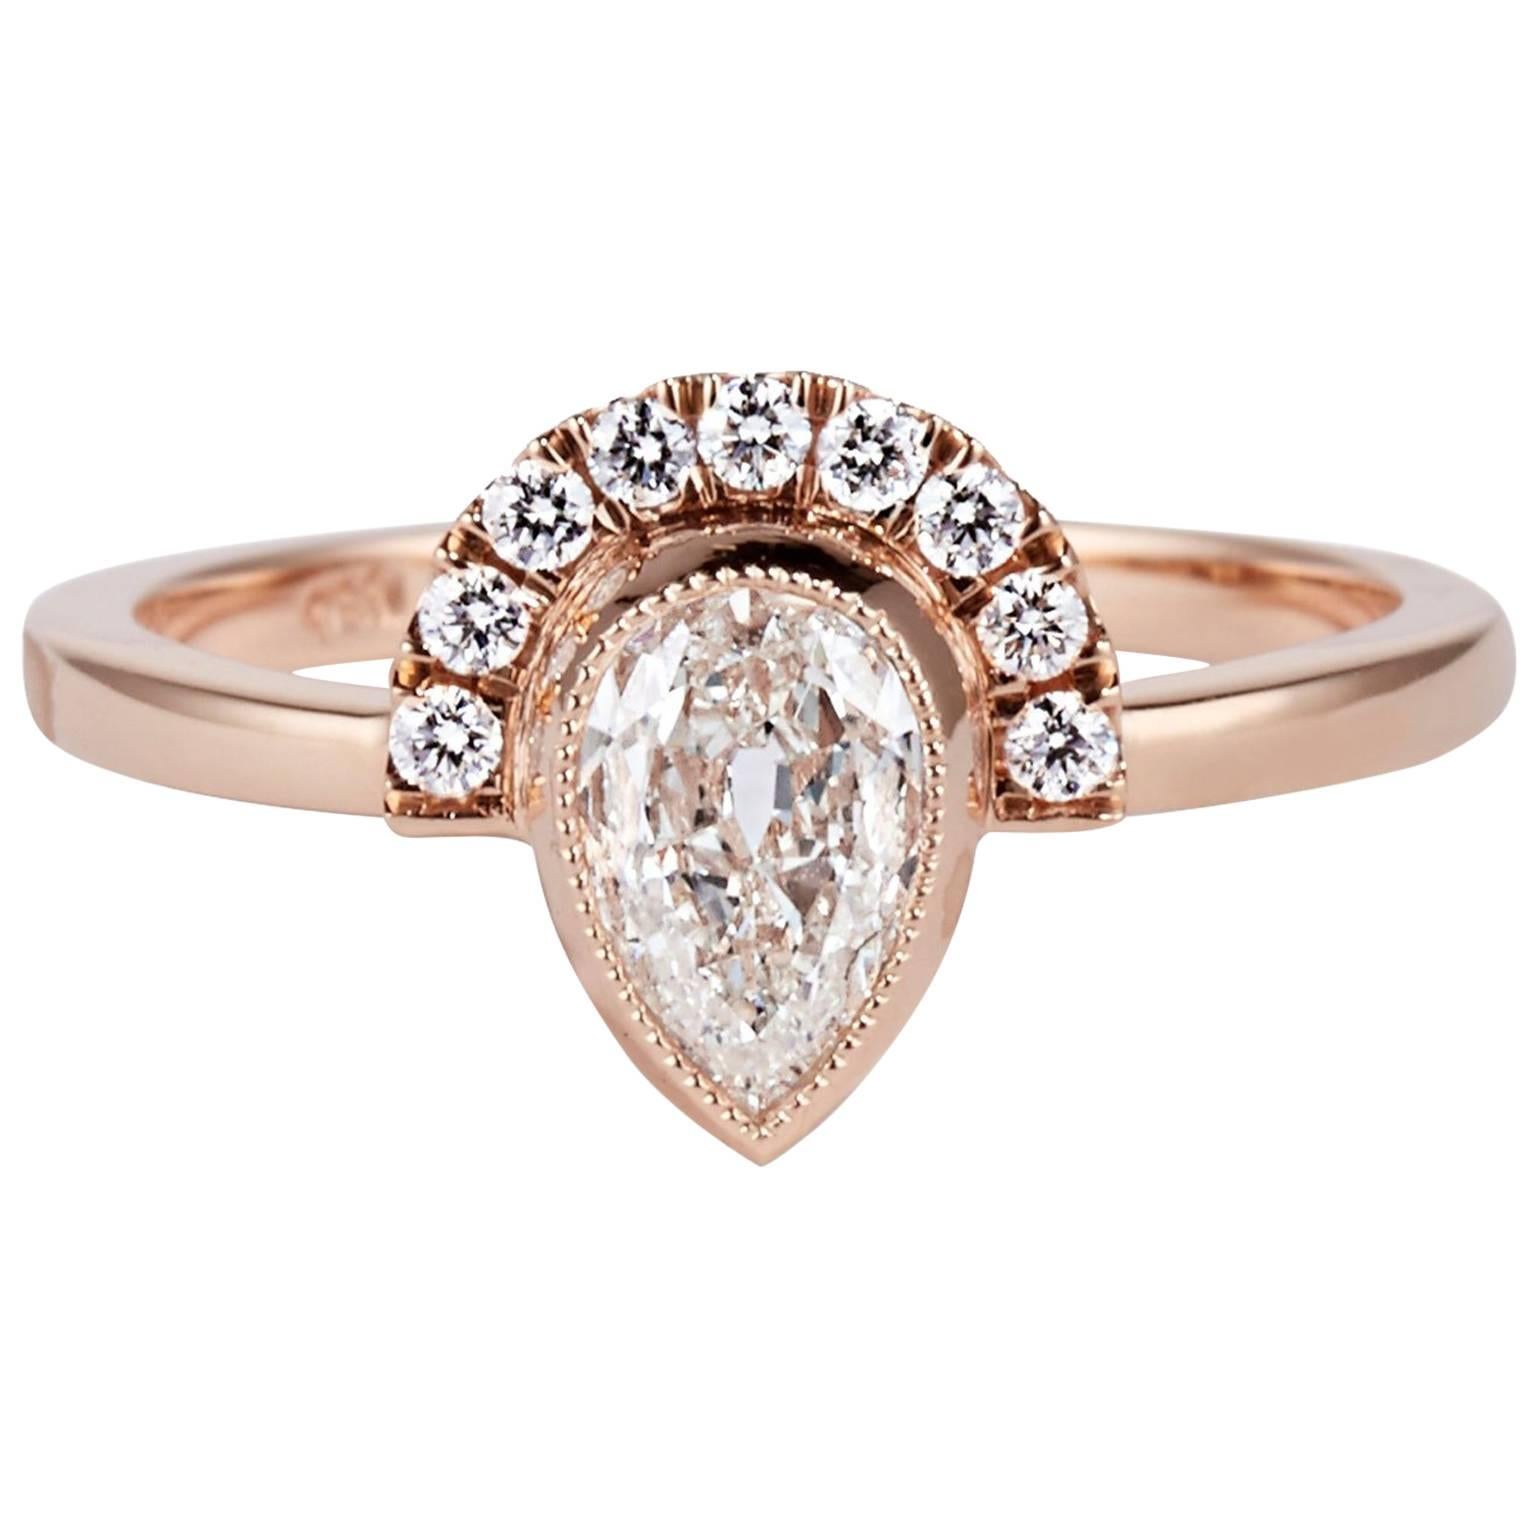 Cushla Whiting 'Holly' 0.537ct Antique Cut Pear Shaped Diamond Engagement Ring For Sale